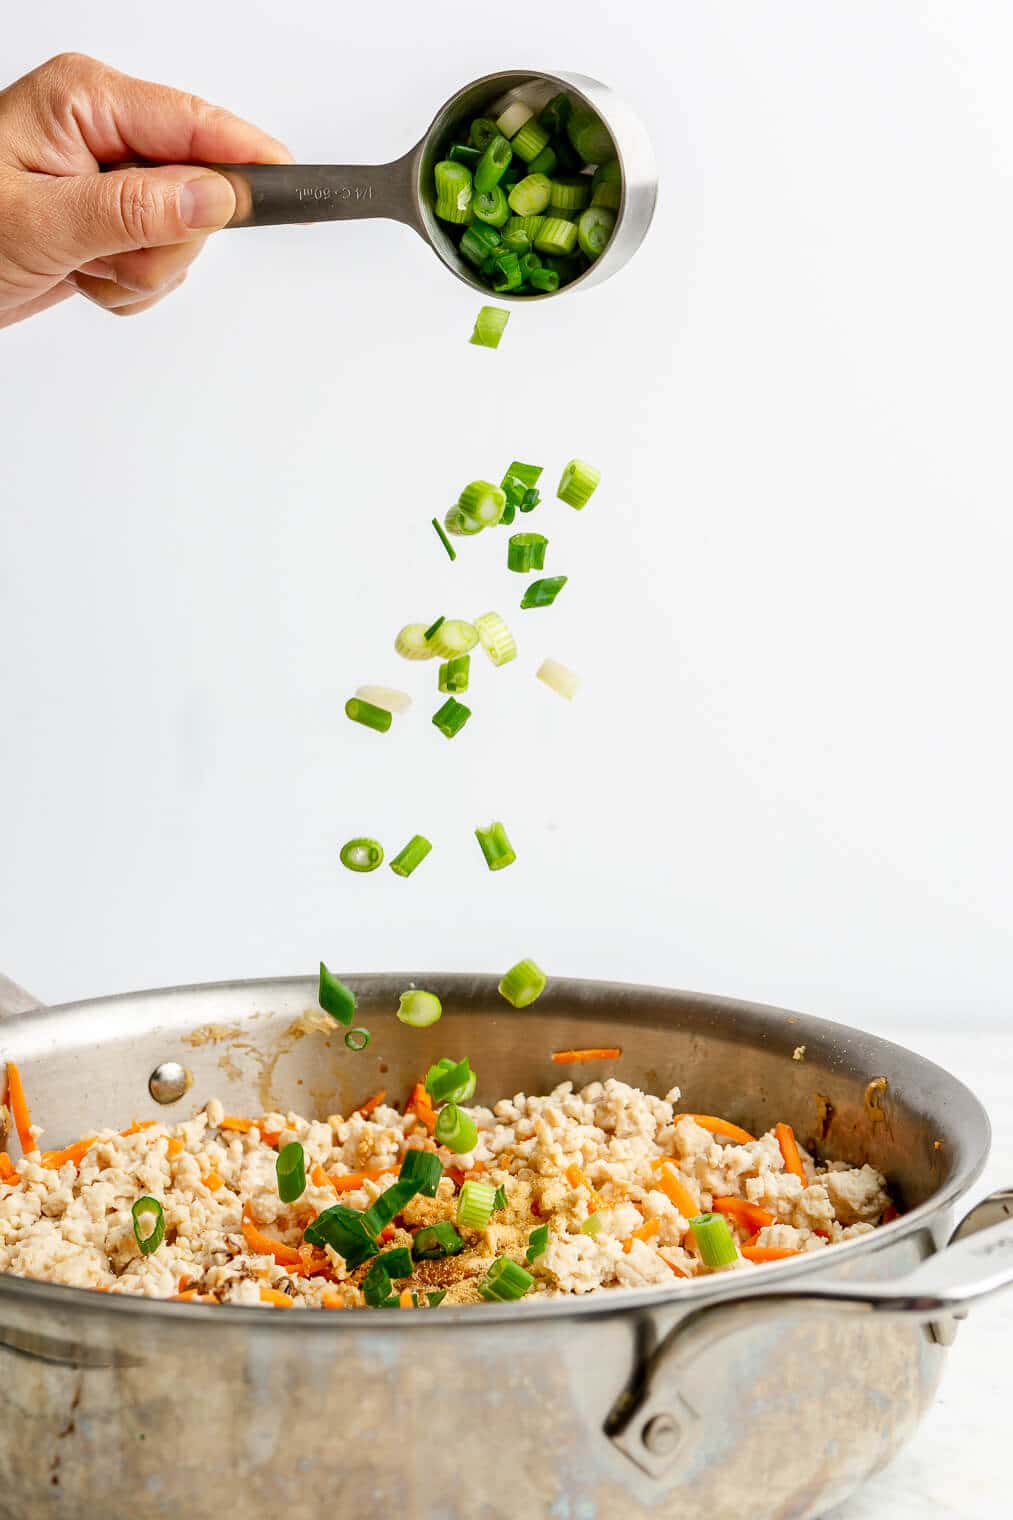 A person adding diced green onions to a skillet of ground turkey and shredded carrots.